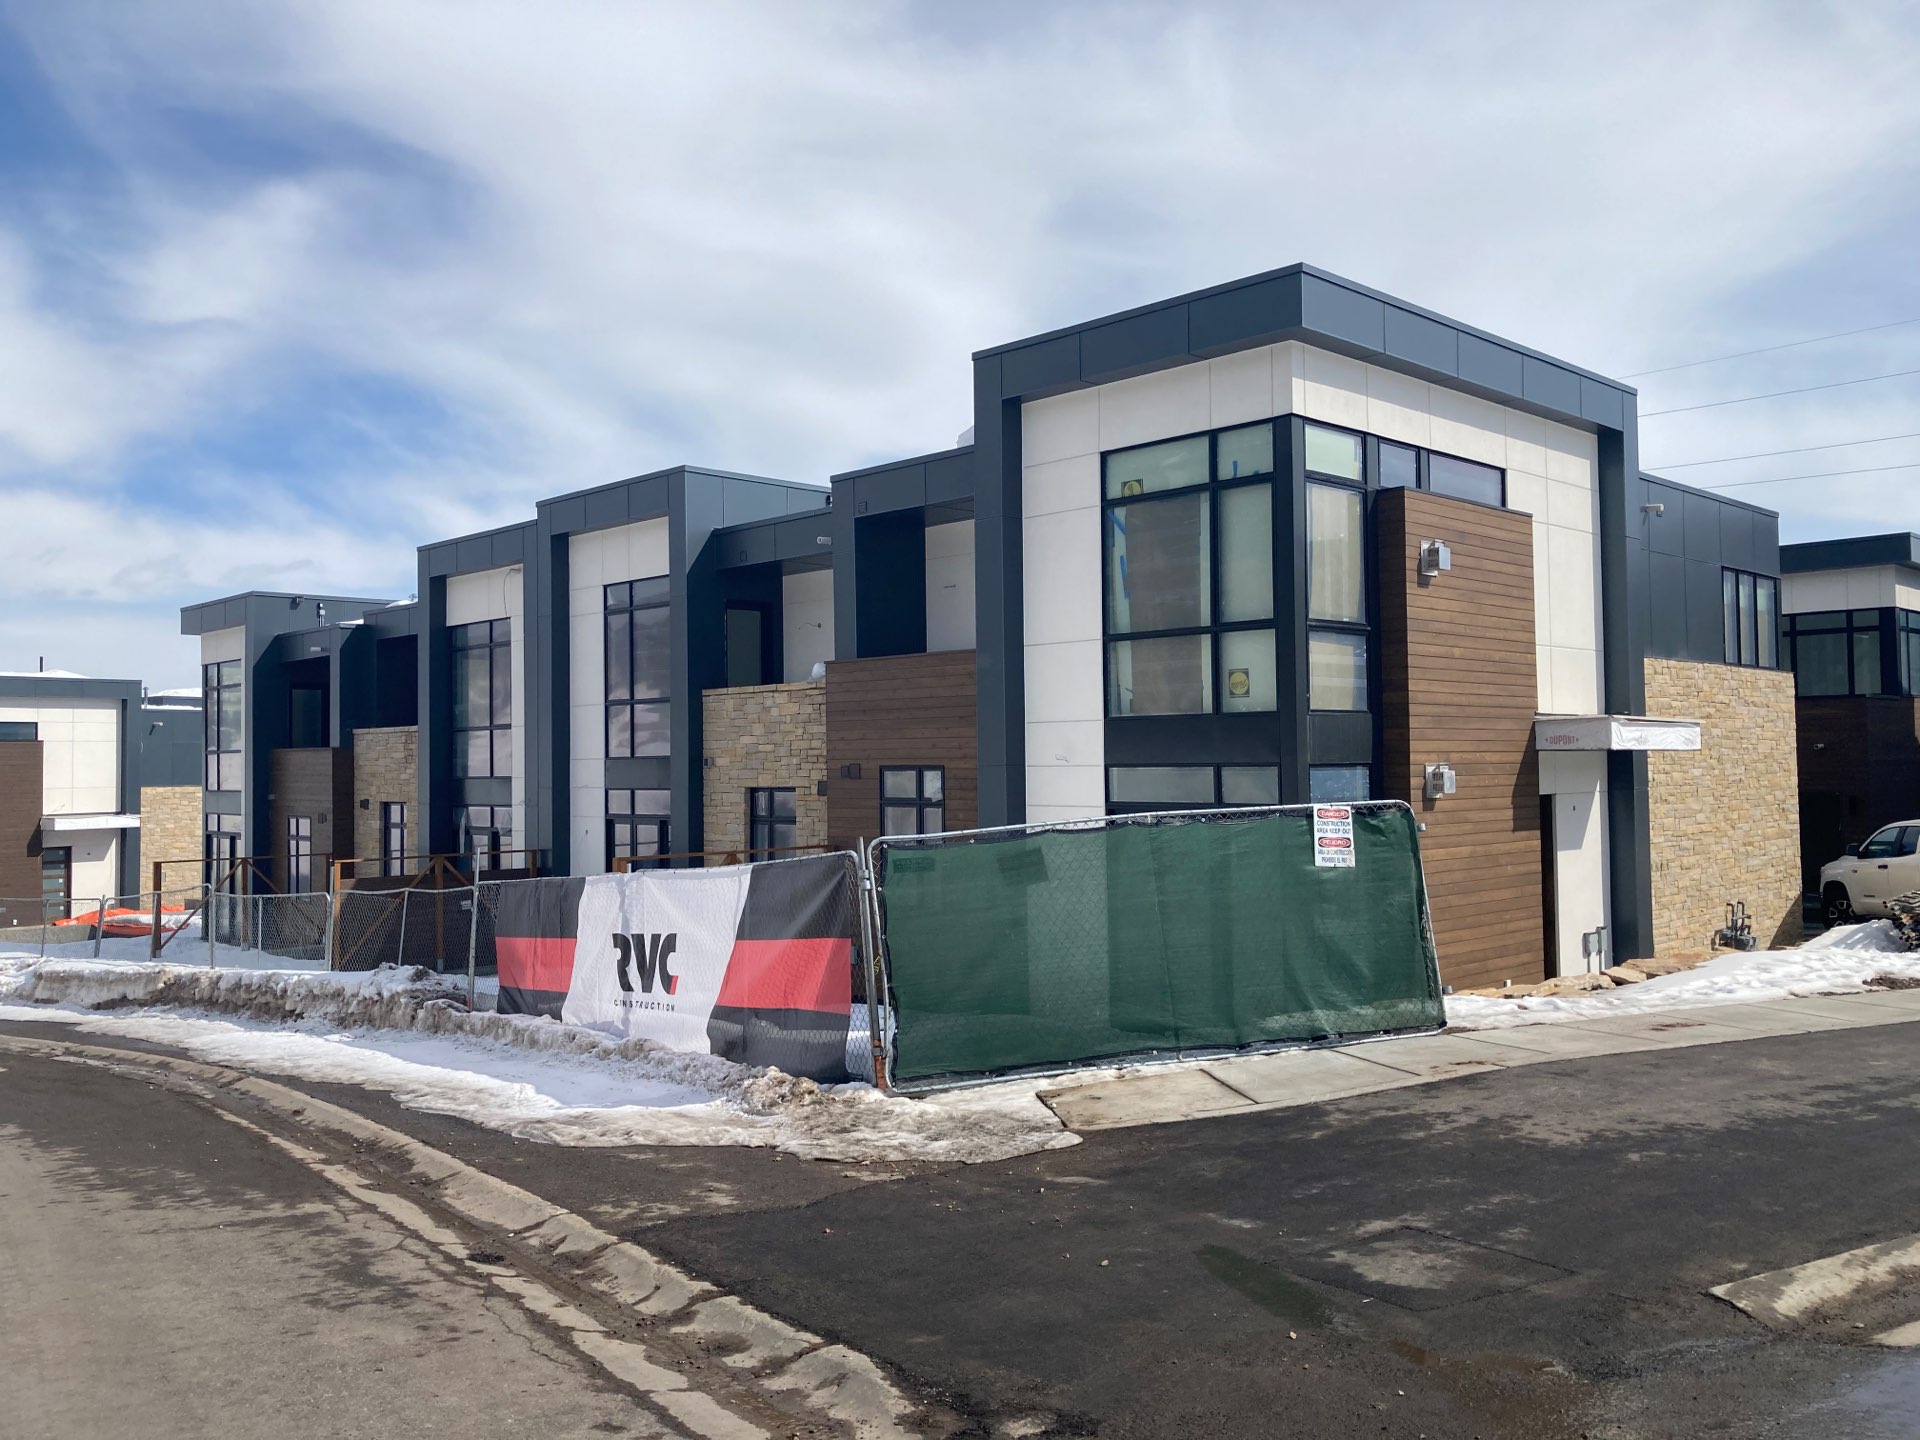 Unfinished exterior of Viridian Townhomes at Canyons Village in Park City, Utah, architectural design by Elliott Workgroup